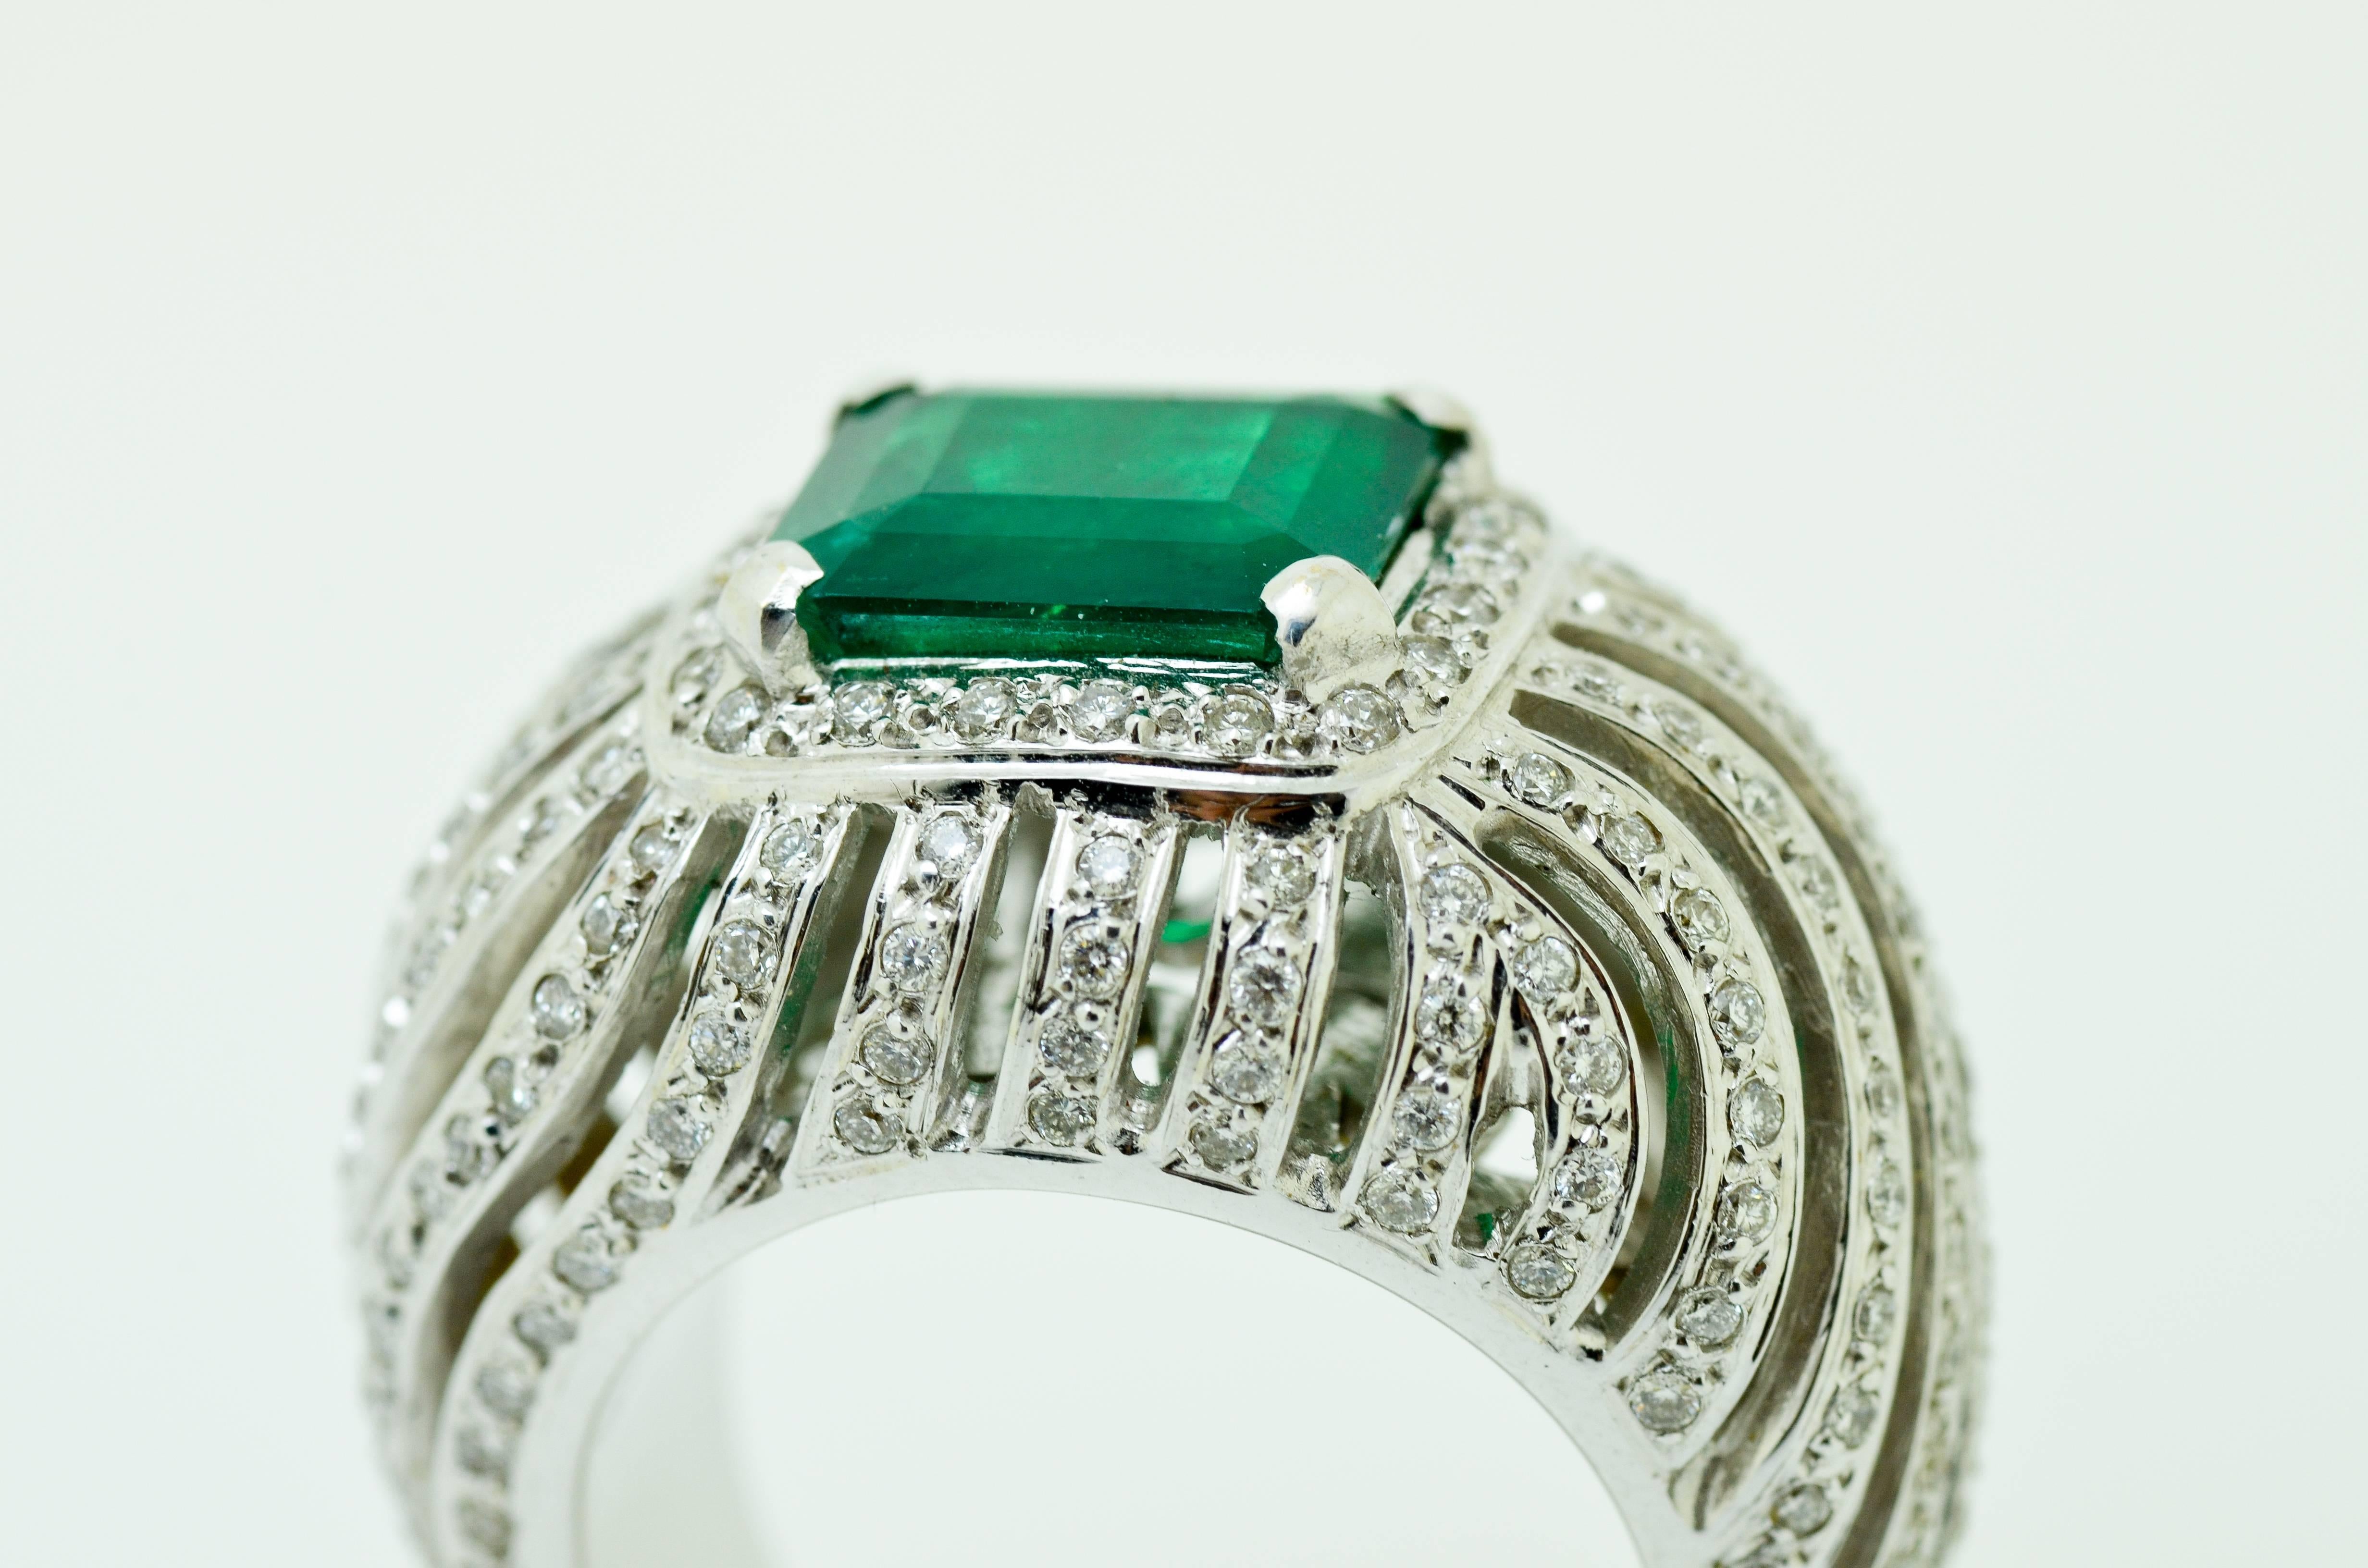 Stylish 18 karat white gold, diamond and emerald ring consisting a natural rectangle emerald centre stone and over 1 carat of clean white brilliant cut stones on mount. 

Accompanied by GEMA CYT certiciation:

Emerald: 6,85 Carats
Diamonds: